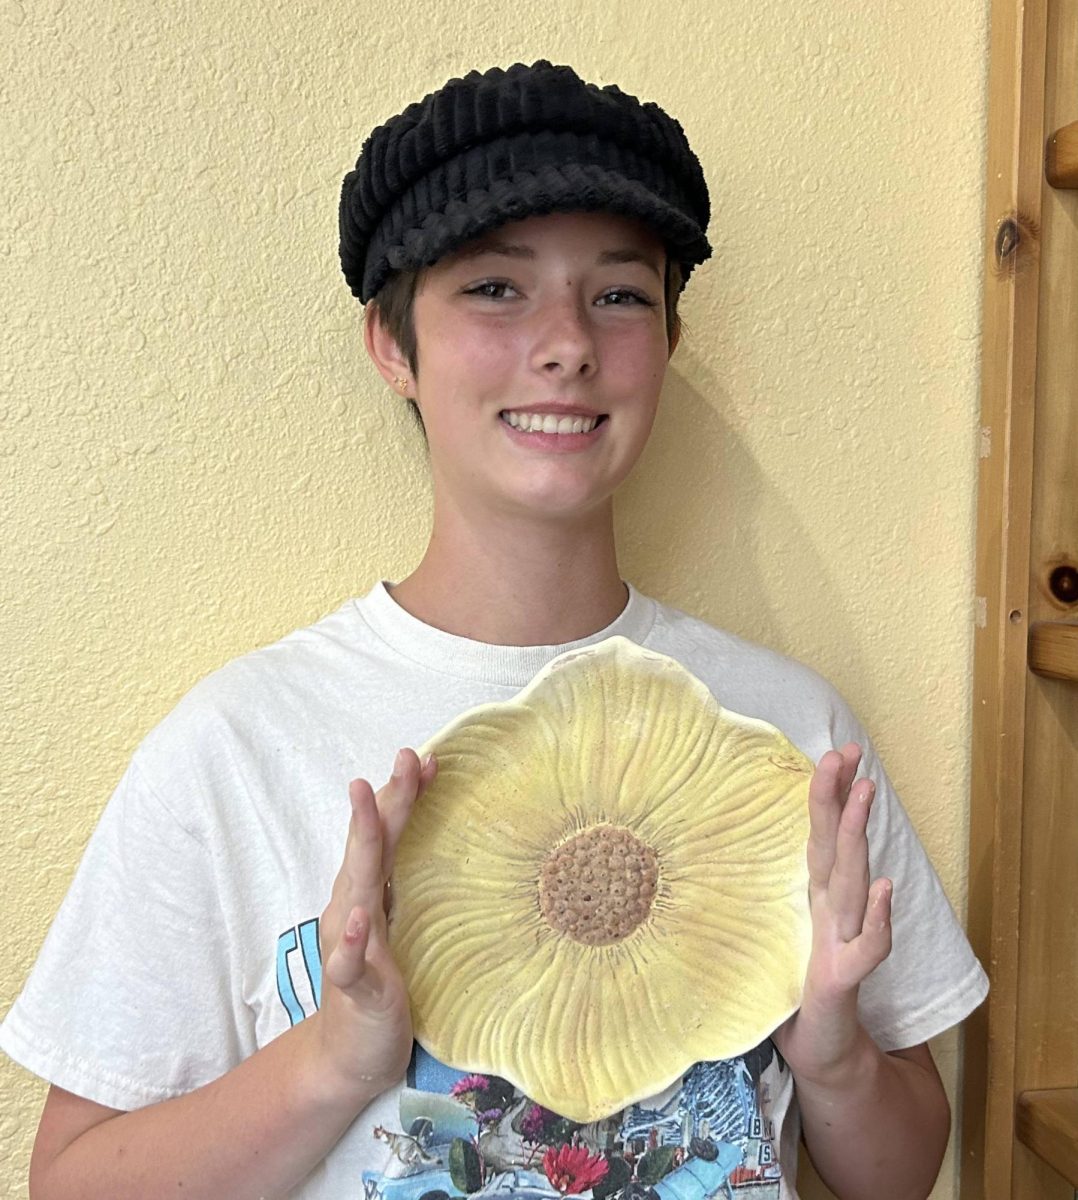 Sheela Zimels poses for a photo at The Hive in San Clemente, proud of her newest work of pottery; a sunflower plate that she made as a gift for her grandma. The plate took 4 hours to make, not including the week that the greenware will spend in the kiln being fired.